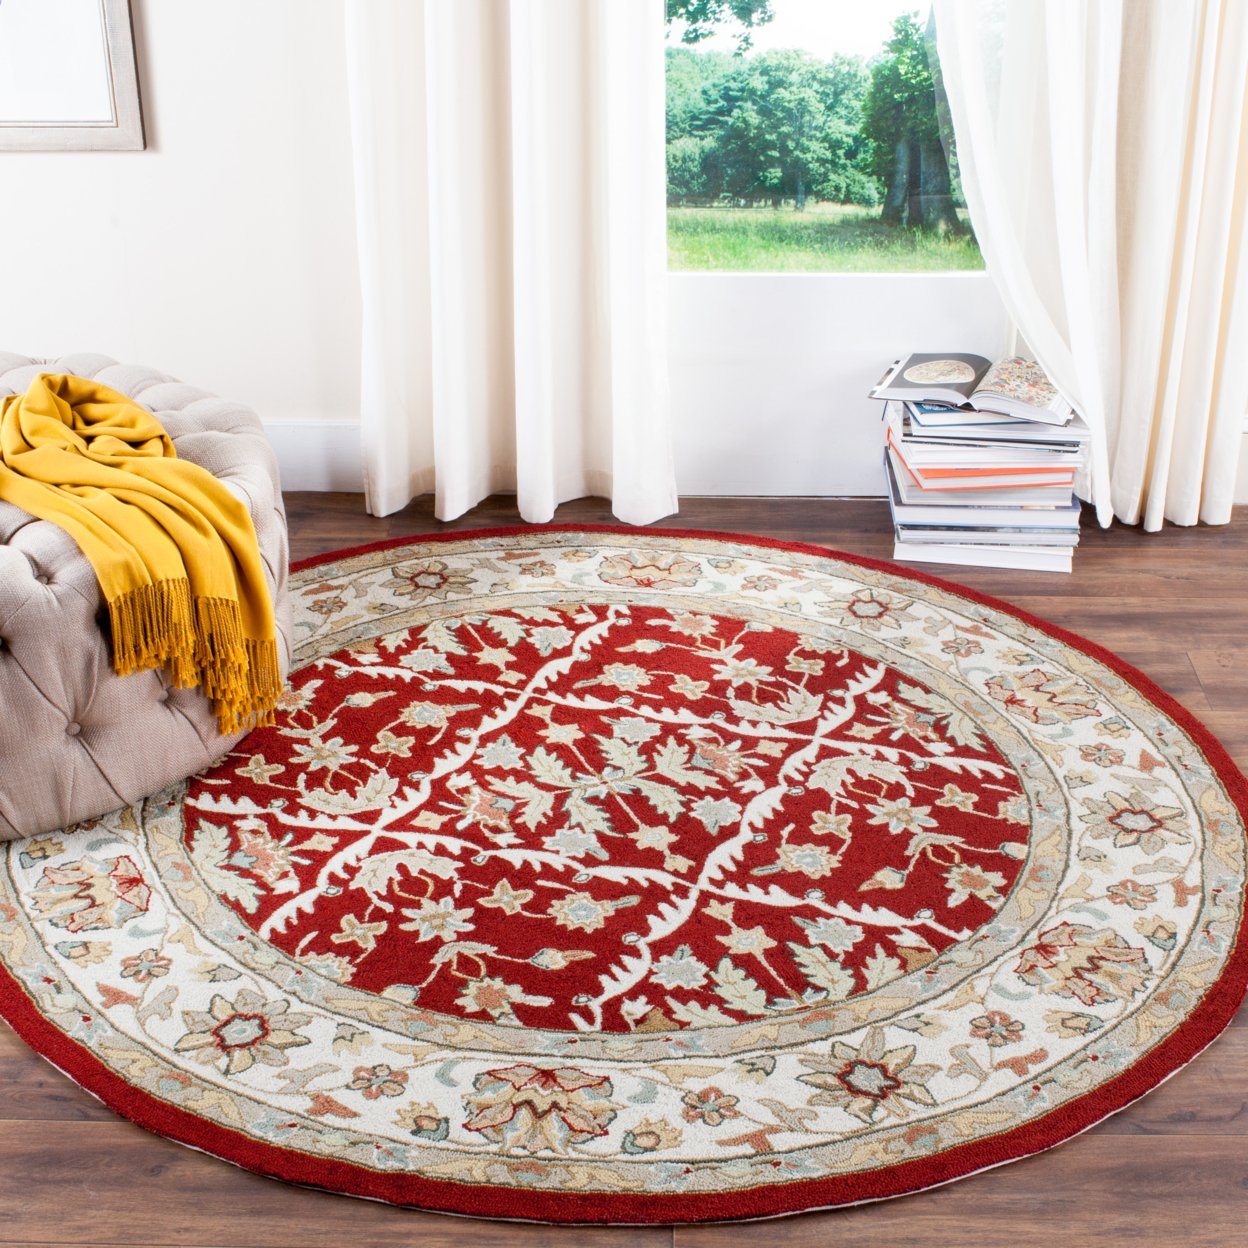 SAFAVIEH Easy Care EZC717A Red / Ivory Rug - 8' Round